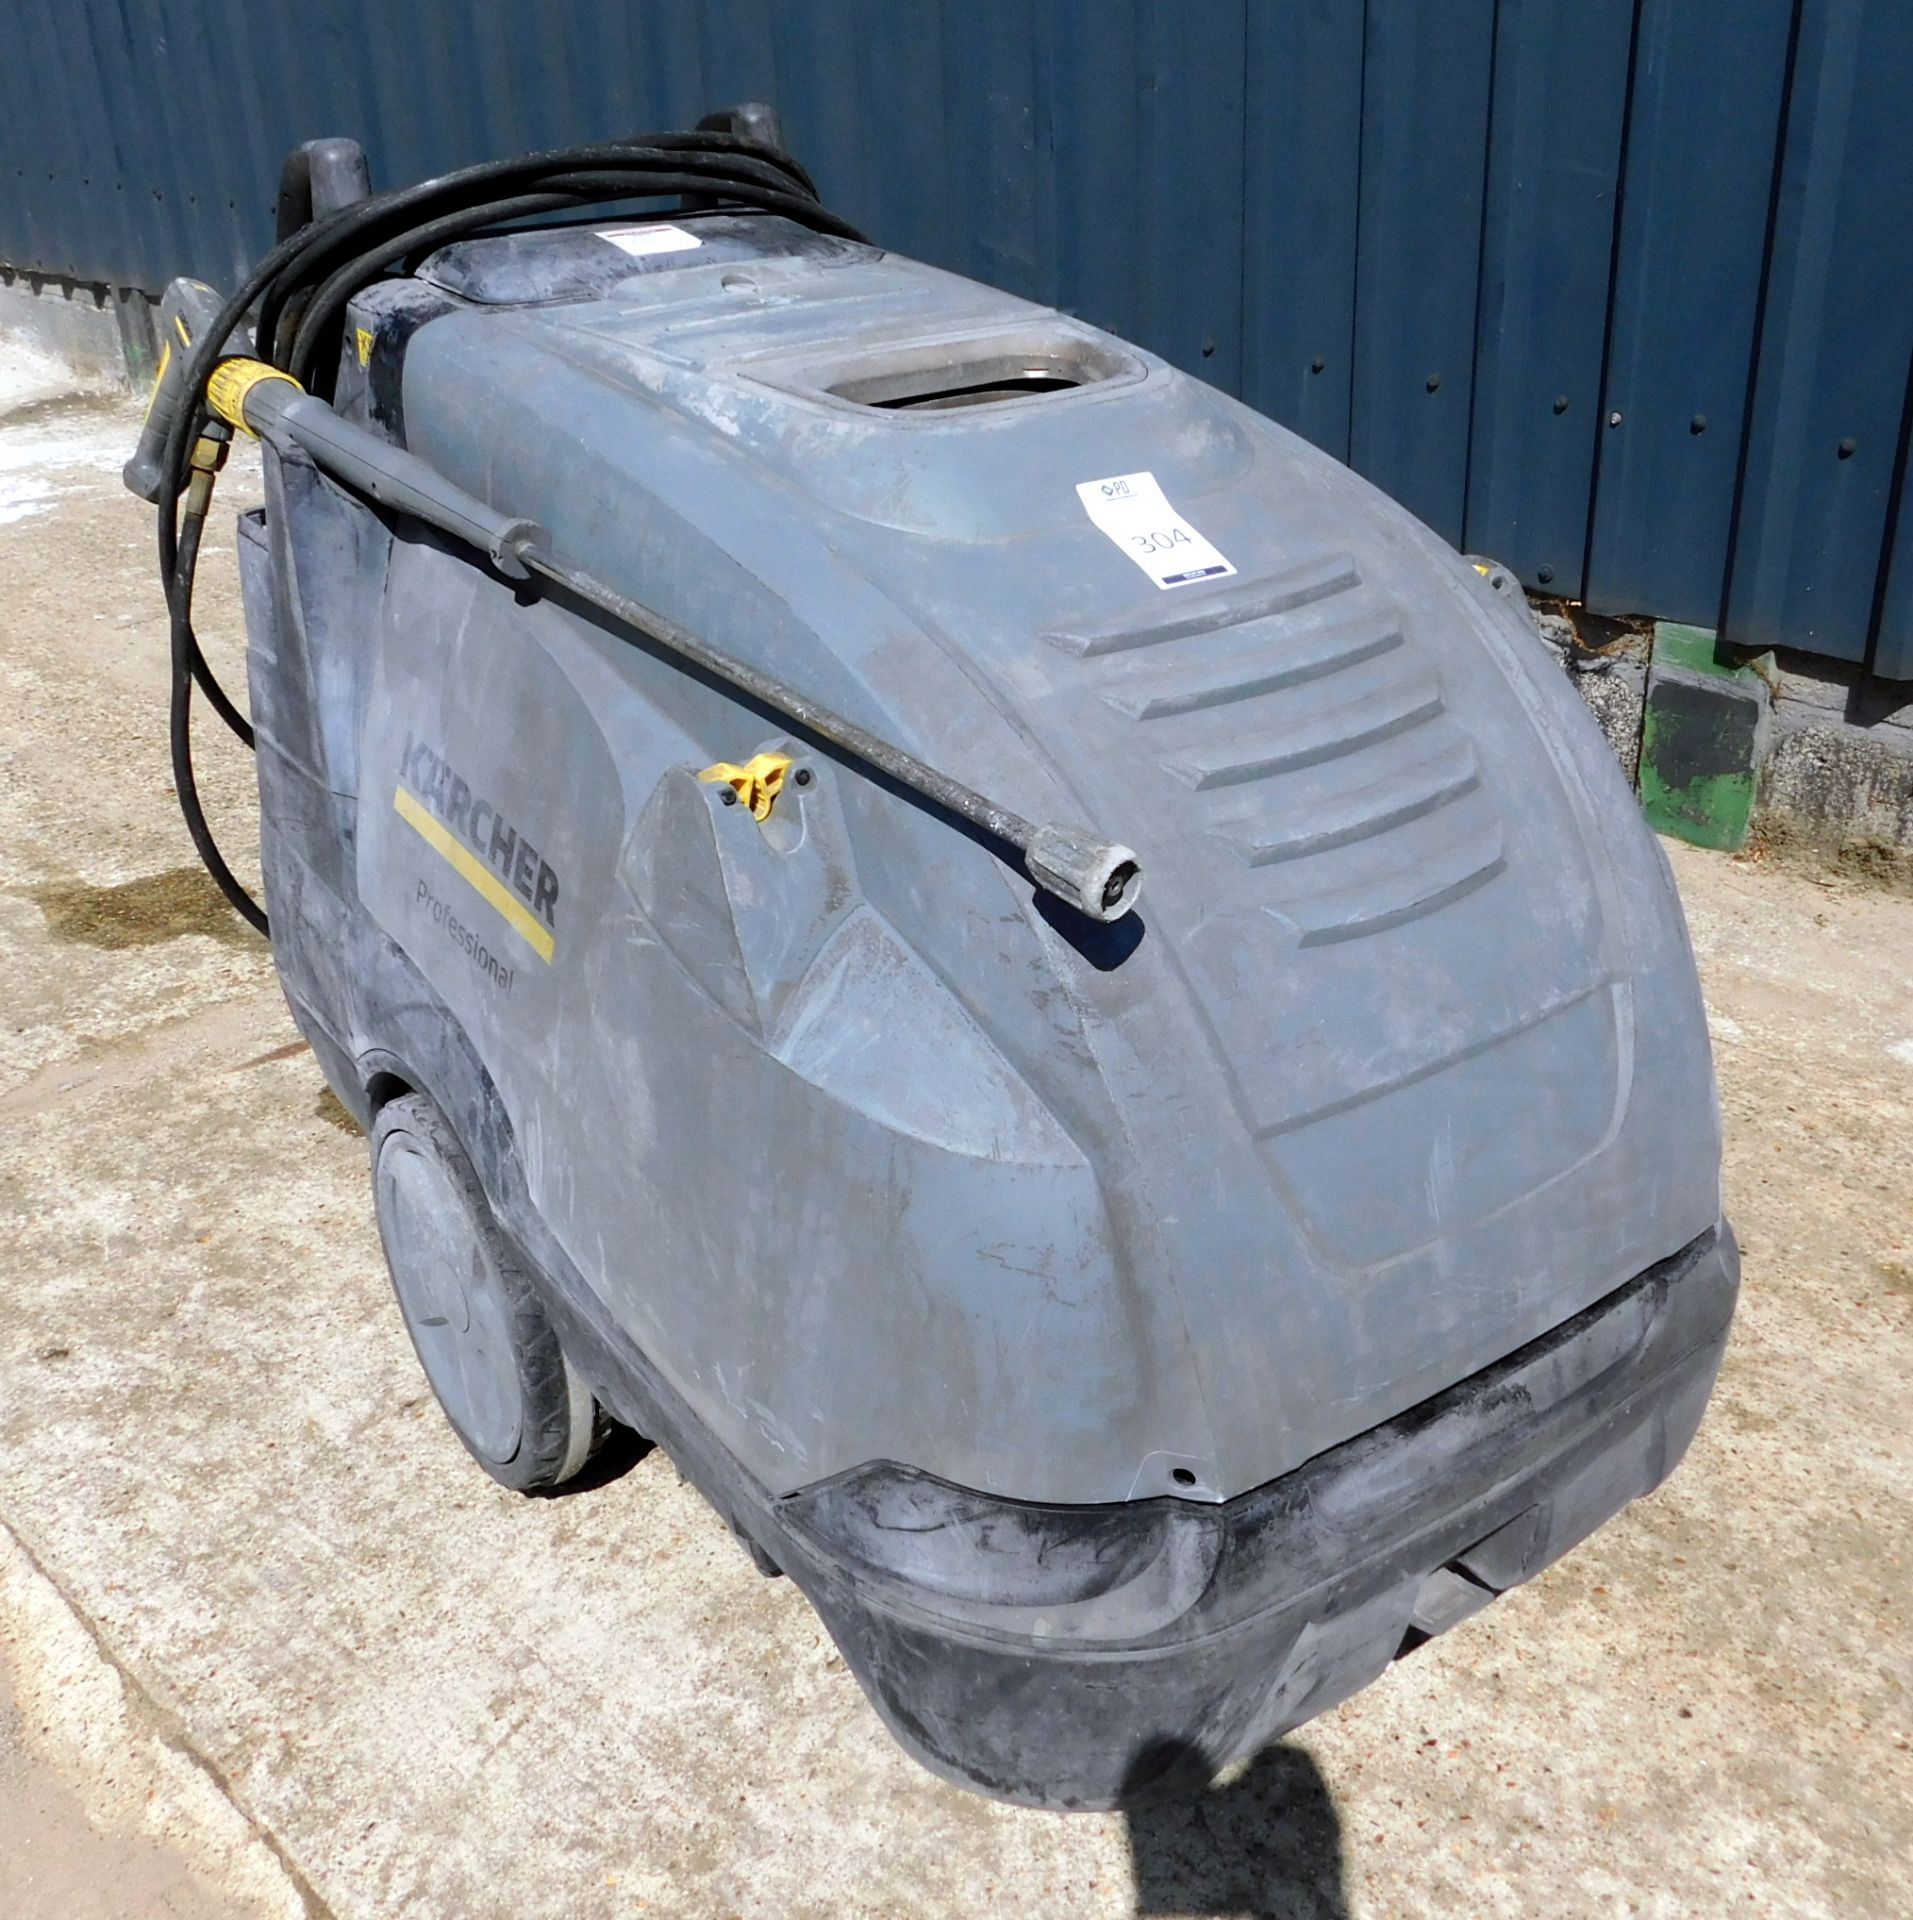 Karcher RM110/HDS 7/10-4M Hot Water High-Pressure Washer Serial No. 021517 (Located Brentwood, See